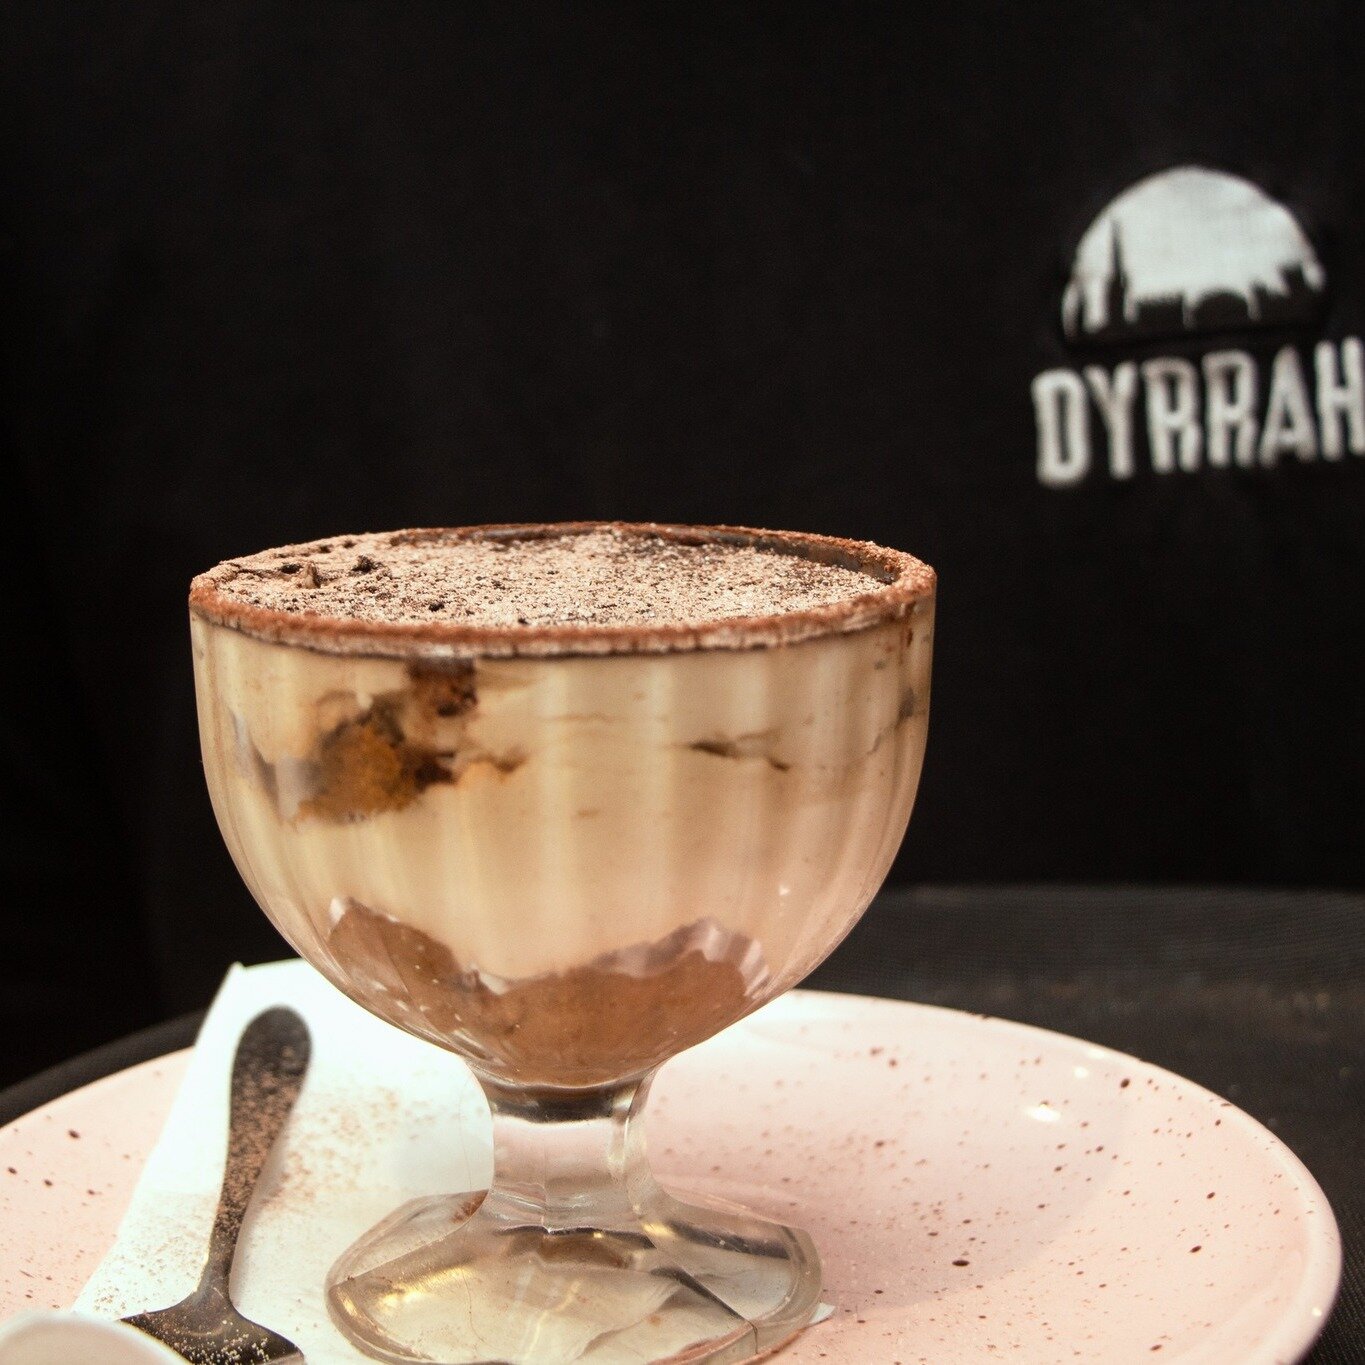 Treat yourself at #dyrrahcoffee , we are open every day: Mon 8am - 5.30pm, Tue 8am - 5.30pm, Wed 8am - 5.30pm, Thur 8am - 9.30pm, Fri 8am - 9.30pm, Sat 8am - 9.30pm, Sun 9am - 4pm.